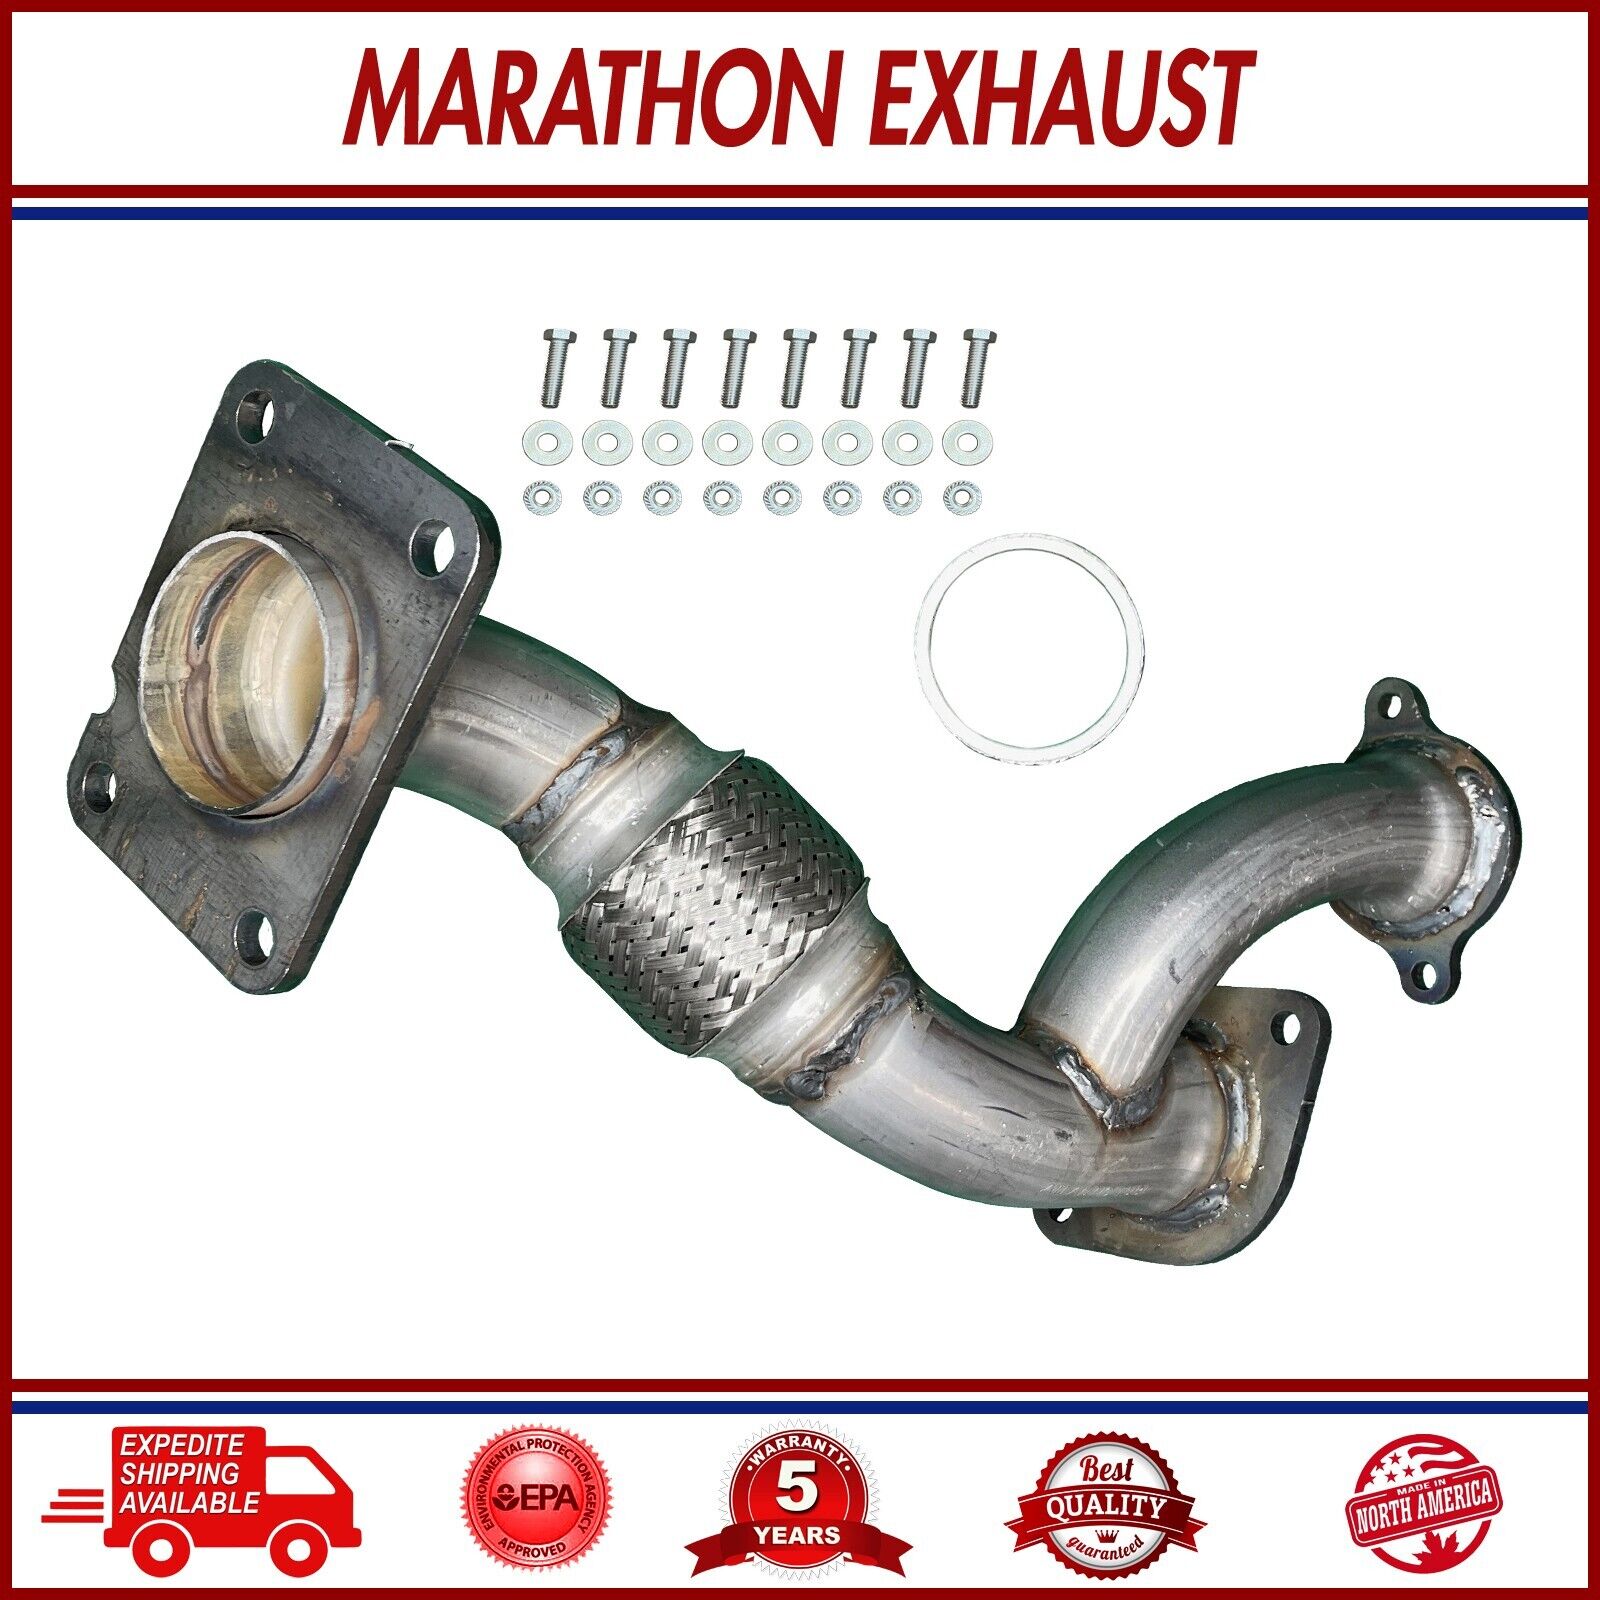 Front Flex Pipe for 06-11 Cadillac DTS | Buick Lucerne 4.6L In Stock Exact Fit